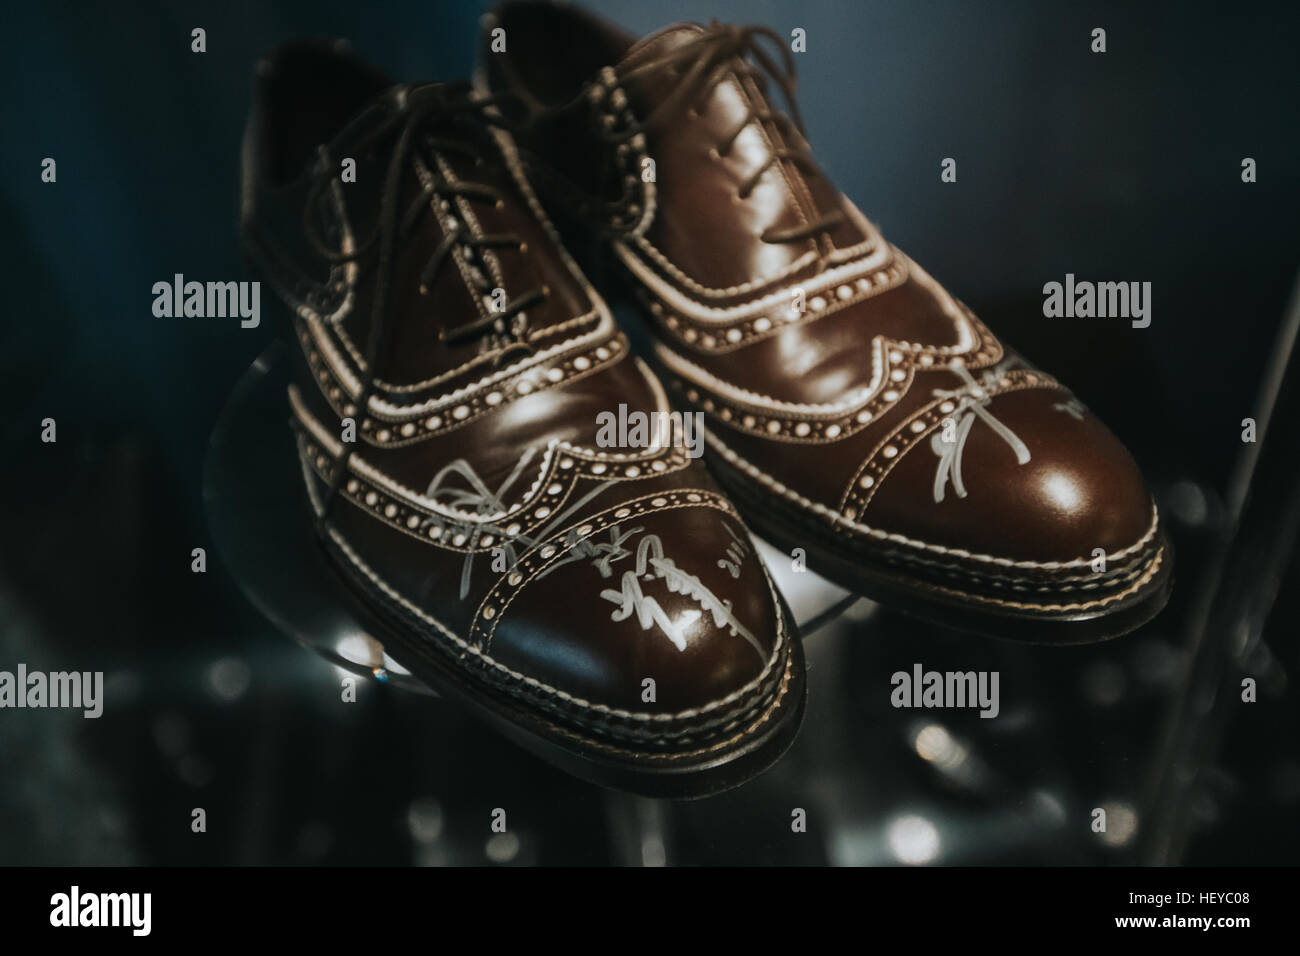 tony leung chinese film actor wore this pair of shoes with his autograph Stock Photo